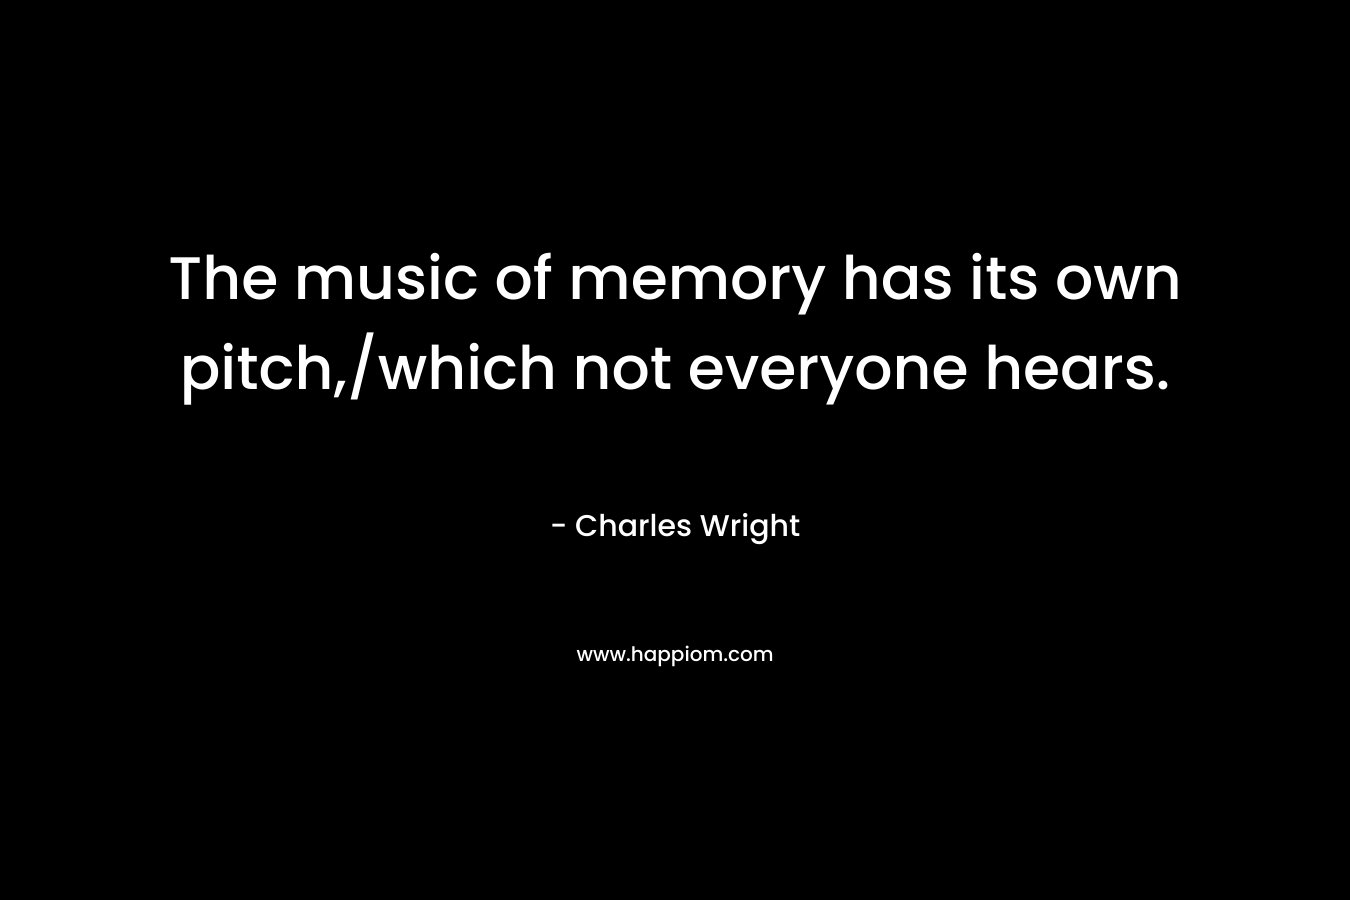 The music of memory has its own pitch,/which not everyone hears.